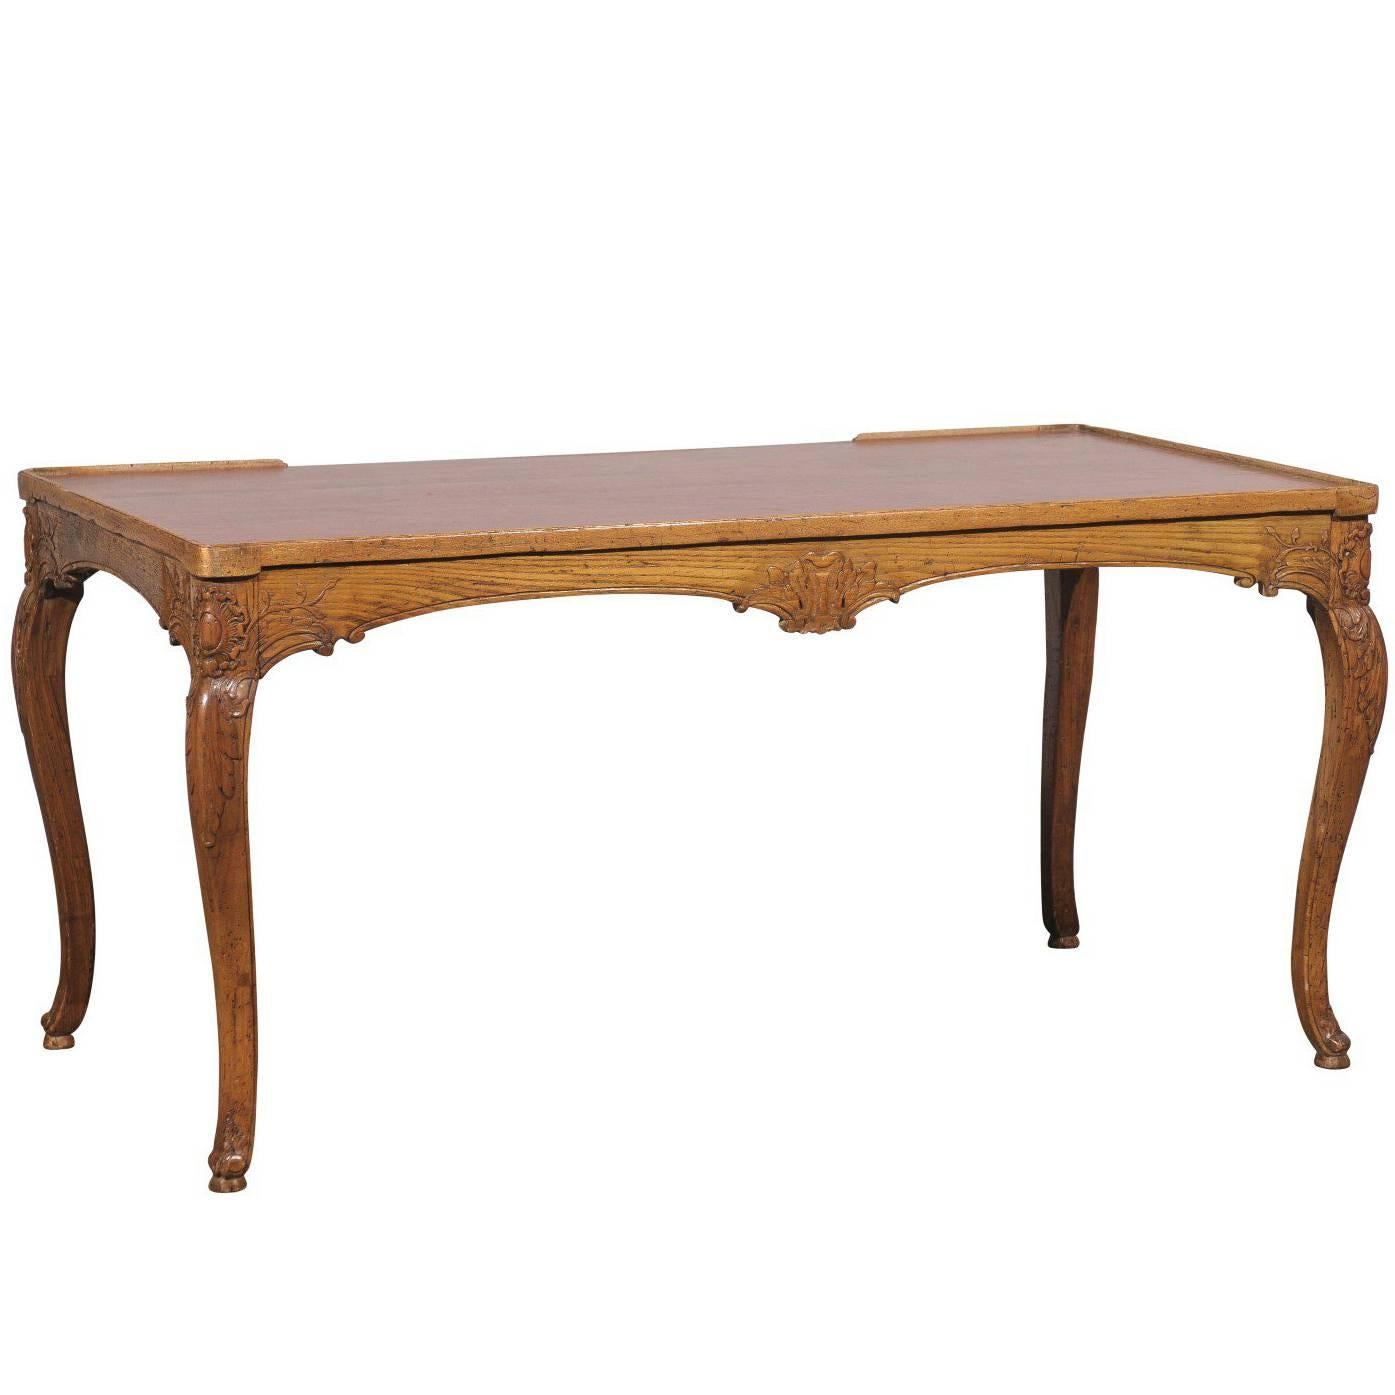 18th-19th Century French Louis XV Style Carved Tric-Trac Table with Leather Top For Sale